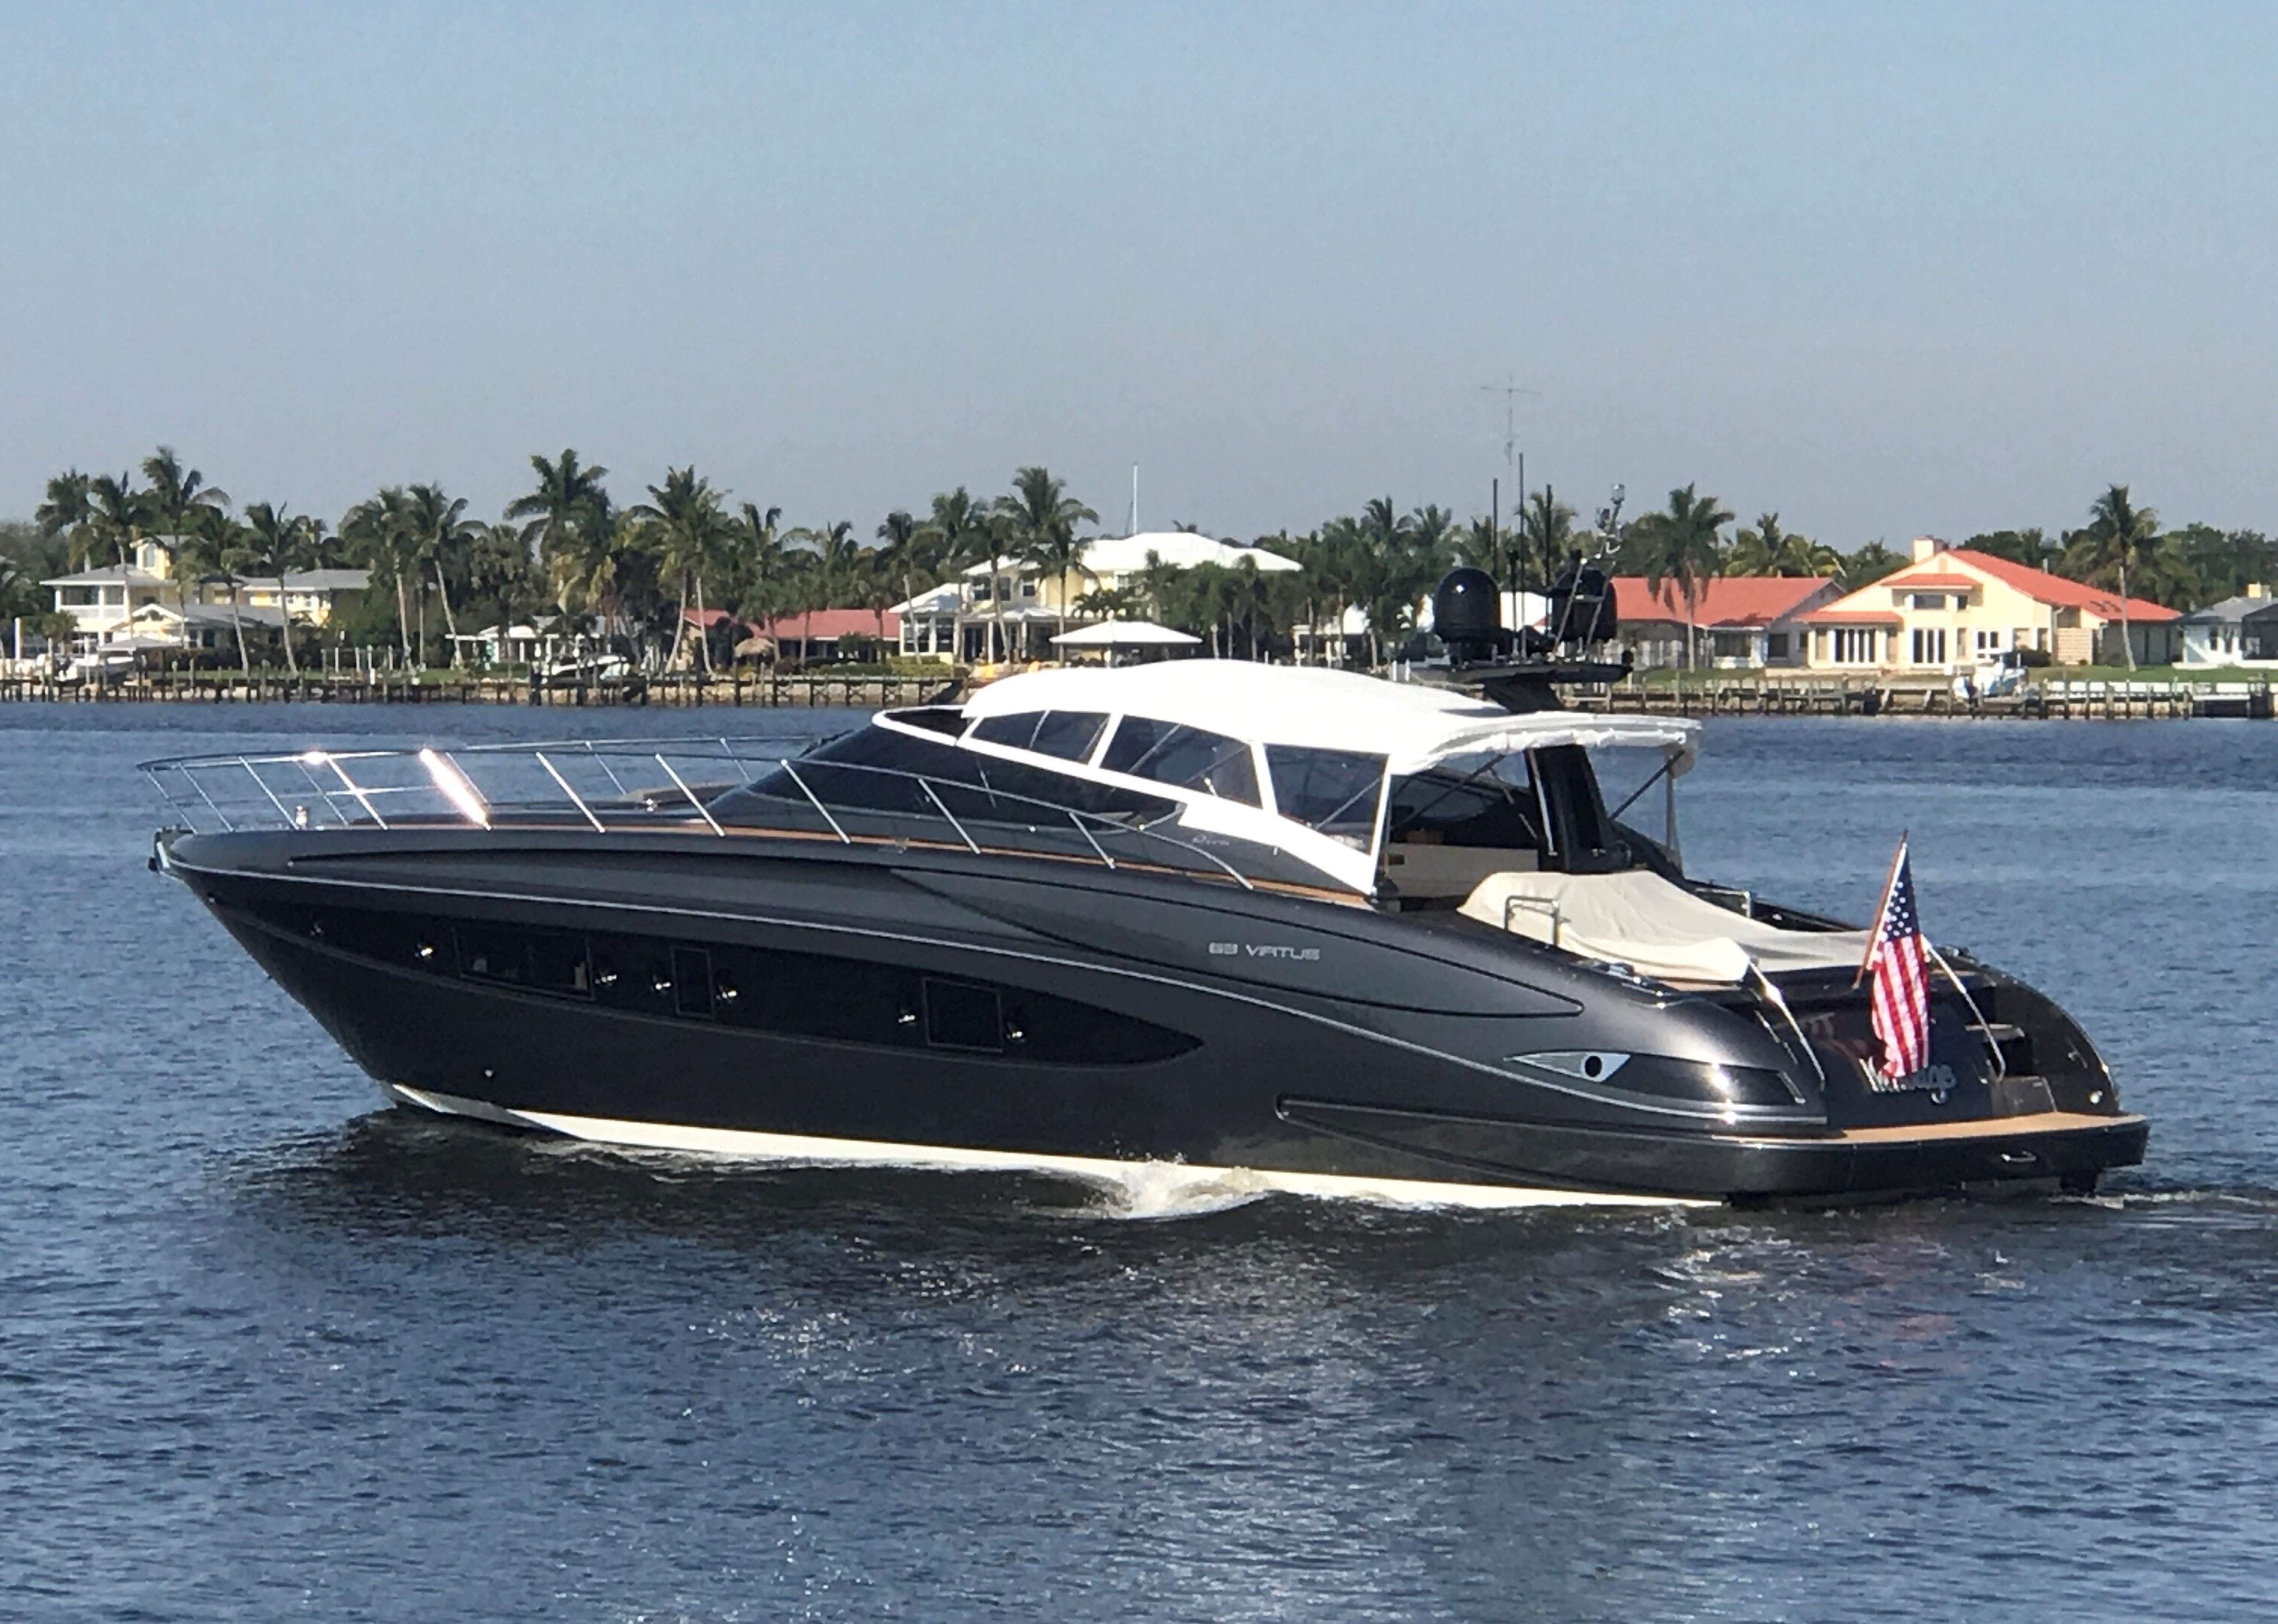 63 ft yacht for sale